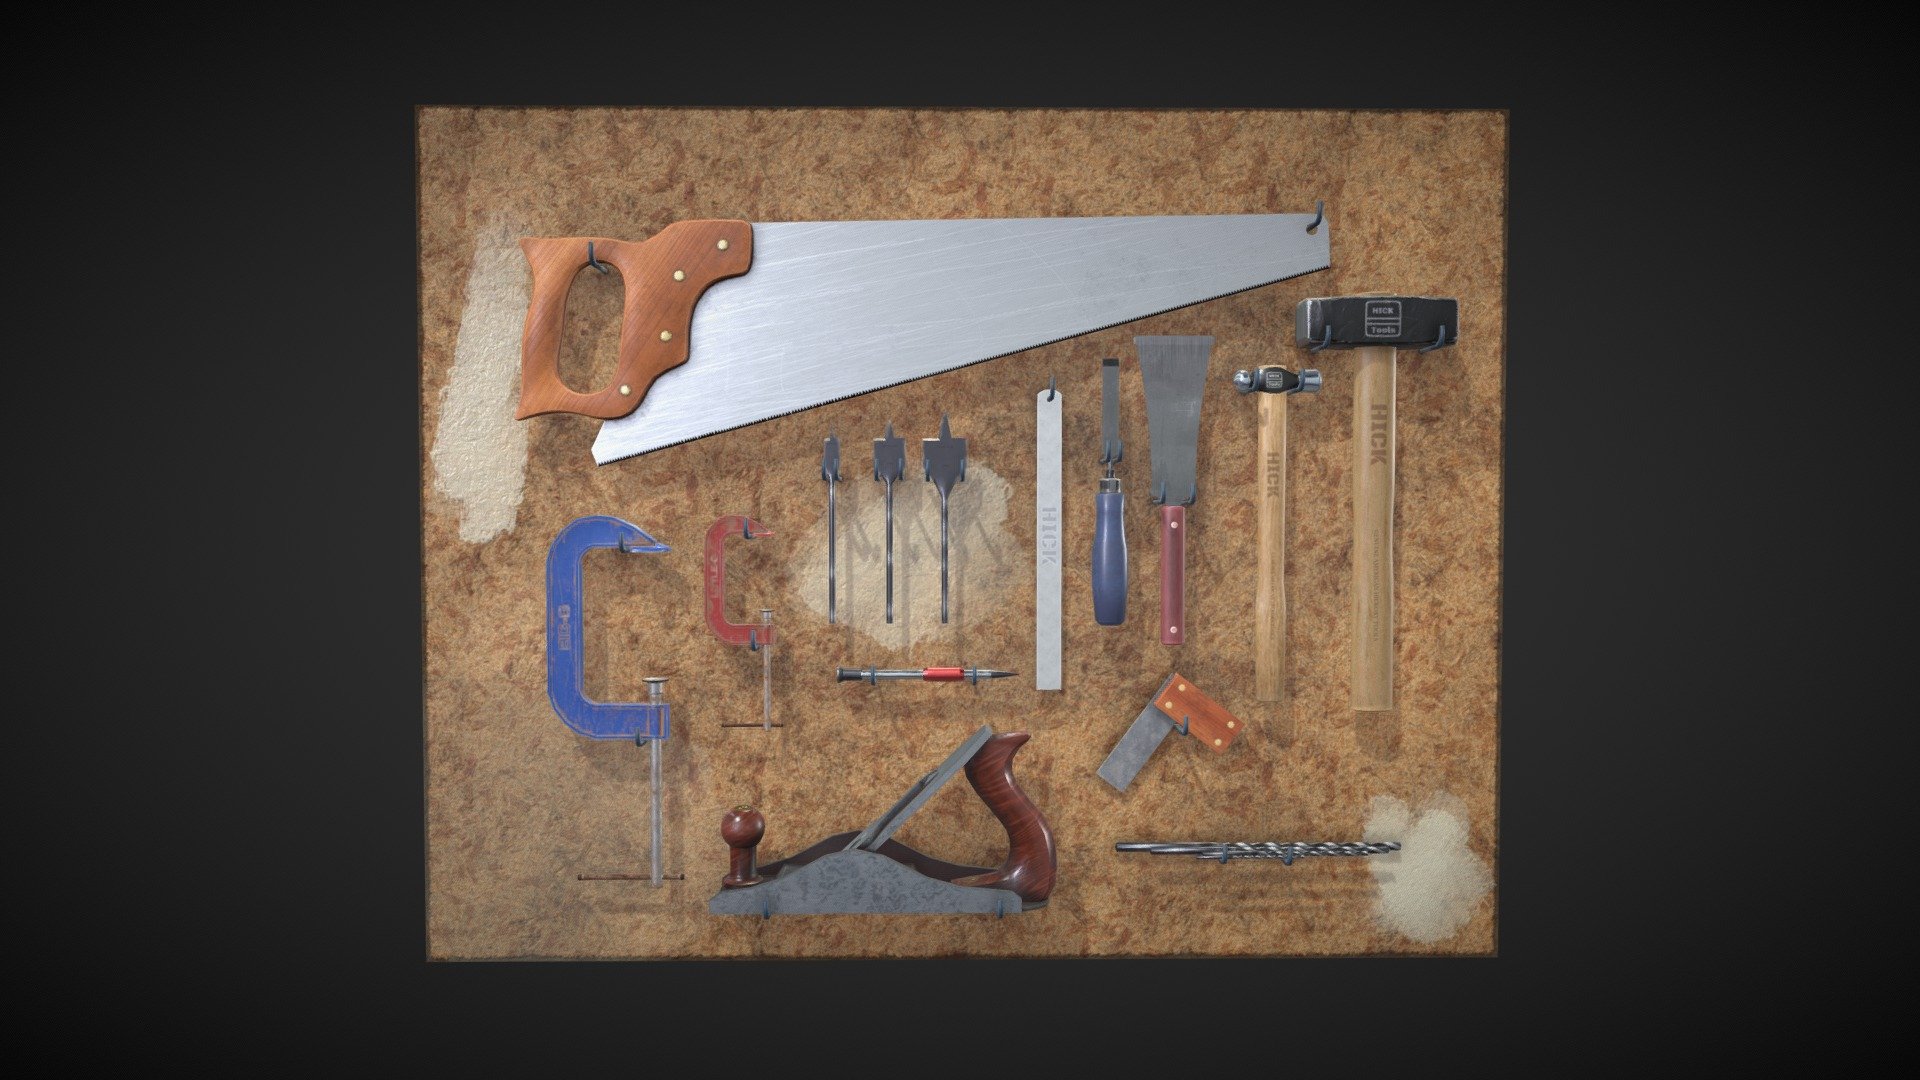 Tool wall with 18 tools

100% quad design.
All Textures created in Substance Painter and exported in 2K PBR (Roughness/Metallic) formats.
Logically named objects, materials and textures.
Modelled in Blender 2.9
Textured in Substance Painter 2020.2.1.
Modelled to real world scales.
Fully and efficiently UV unwrapped using overlapping where possible to maximise texture resolution.
Game ready, as a single peice to fill out a scene or individual tools in a game.

Tested in Marmoset Viewer, Marmoset Toolbag, EEVEE and Cycles.



Wall - 482 faces


BallPeen Hammer - 344 faces
Center Punch - 288 faces
Chisel - 221 faces
Drillbit.001 - 551 faces
Drillbit.002 - 551 faces
Drillbit.003 - 551 faces
Drillbit.004 - 551 faces
G_Clamp Large - 720 faces
G_Clamp Small - 720 faces
Holesaw Large - 108 faces
Holesaw Medium - 108 faces
Holesaw Small - 108 faces
Lump Hammer - 190 faces
Plane - 457 faces
Ruler - 22 faces
Saw - 990 faces
Scraper - 86 faces
Square - 24 faces
 - Tool Wall With 18 Game Ready Tools - Buy Royalty Free 3D model by PBR3D 3d model